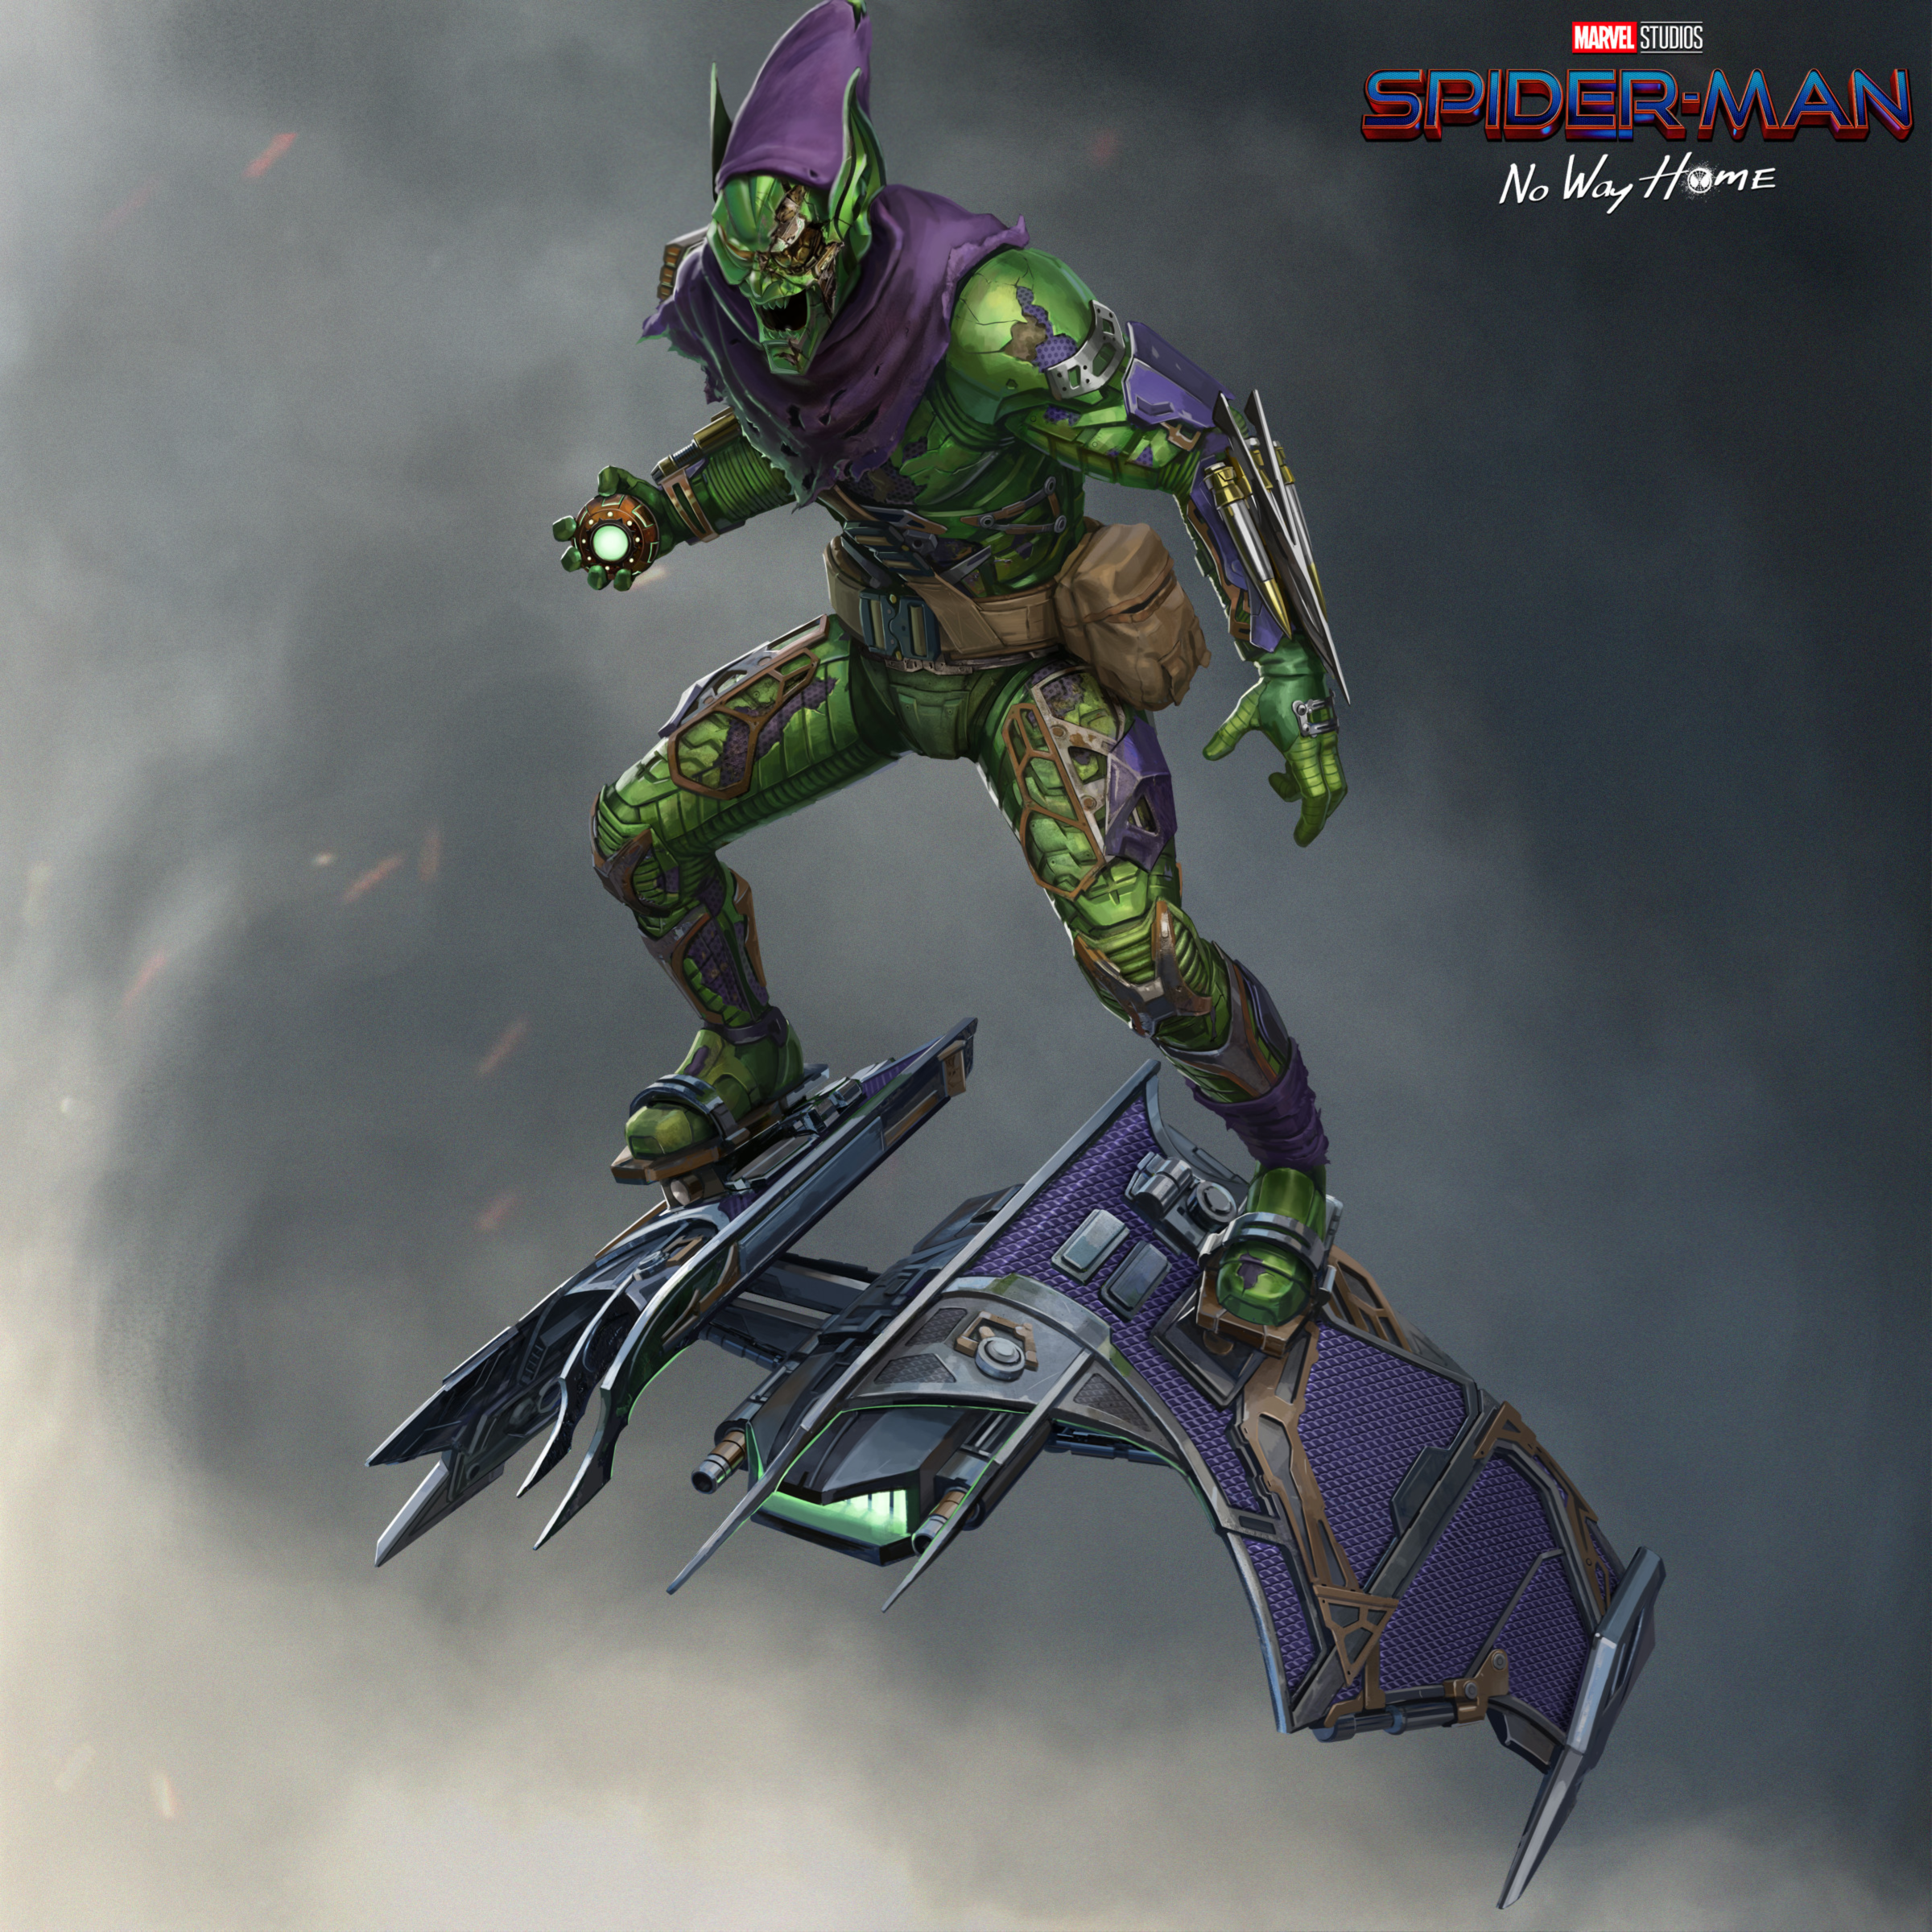 i-was-wondering-how-would-the-green-goblin-from-nwh-look-v0-fv1y5mx9tlba1.png